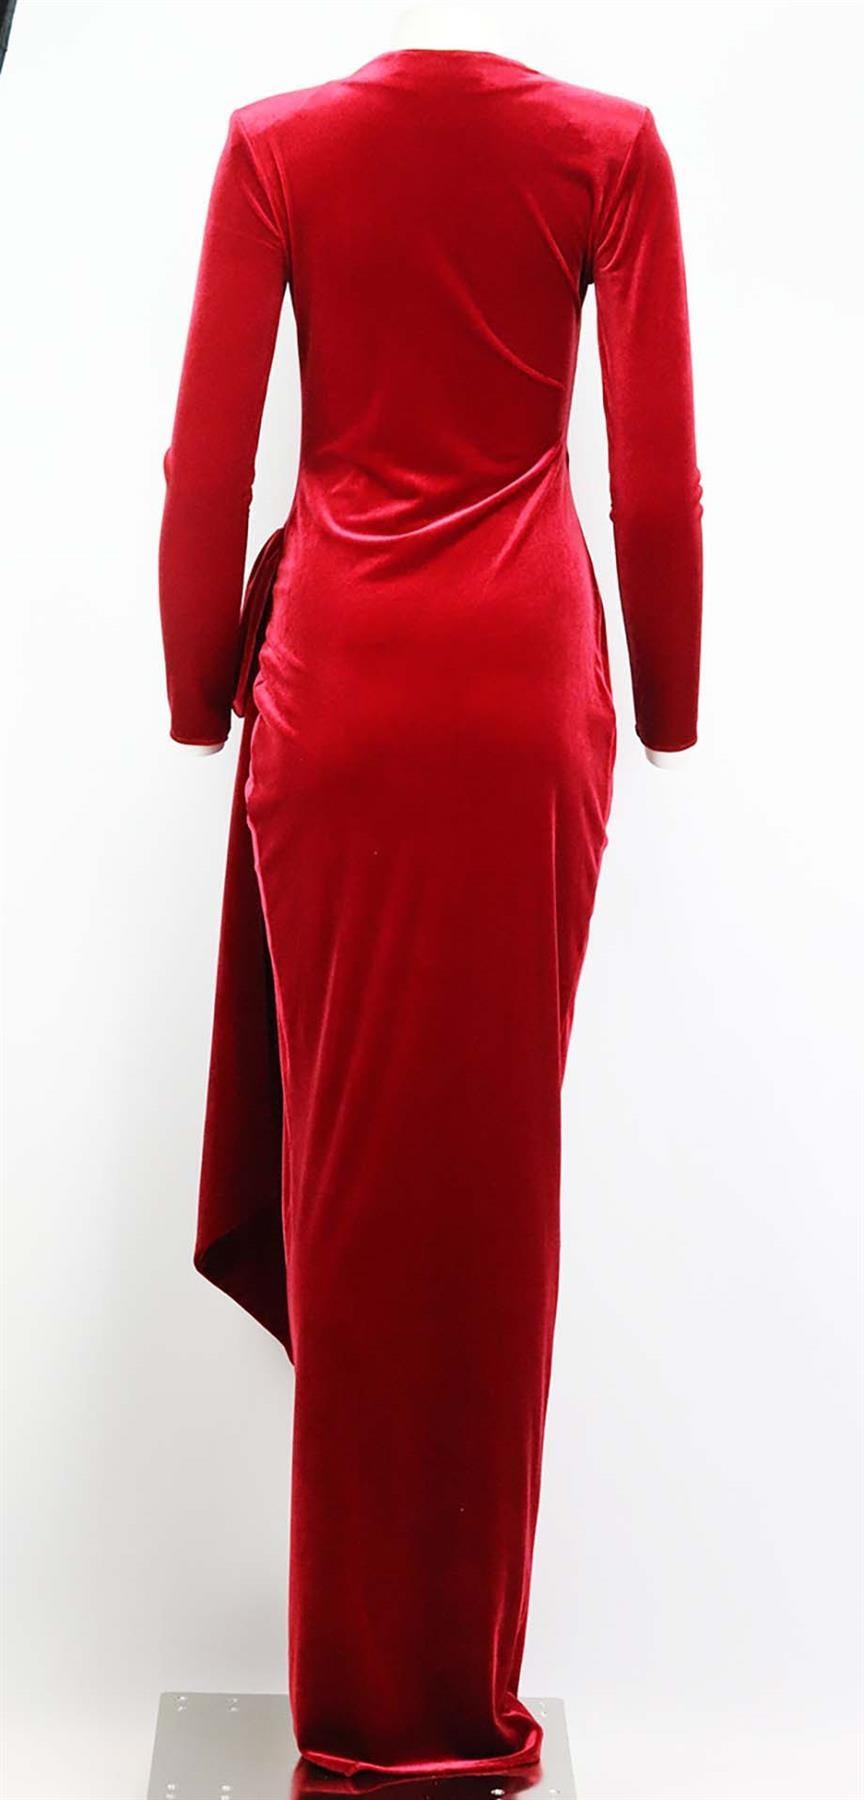 This gown by Alexandre Vauthier is cut from soft stretch-velvet and has a knotted, draped front that falls to an floor length, it has a plunging neckline and structured shoulders giving you that extra confidence. Red velvet. Concealed zip fastening